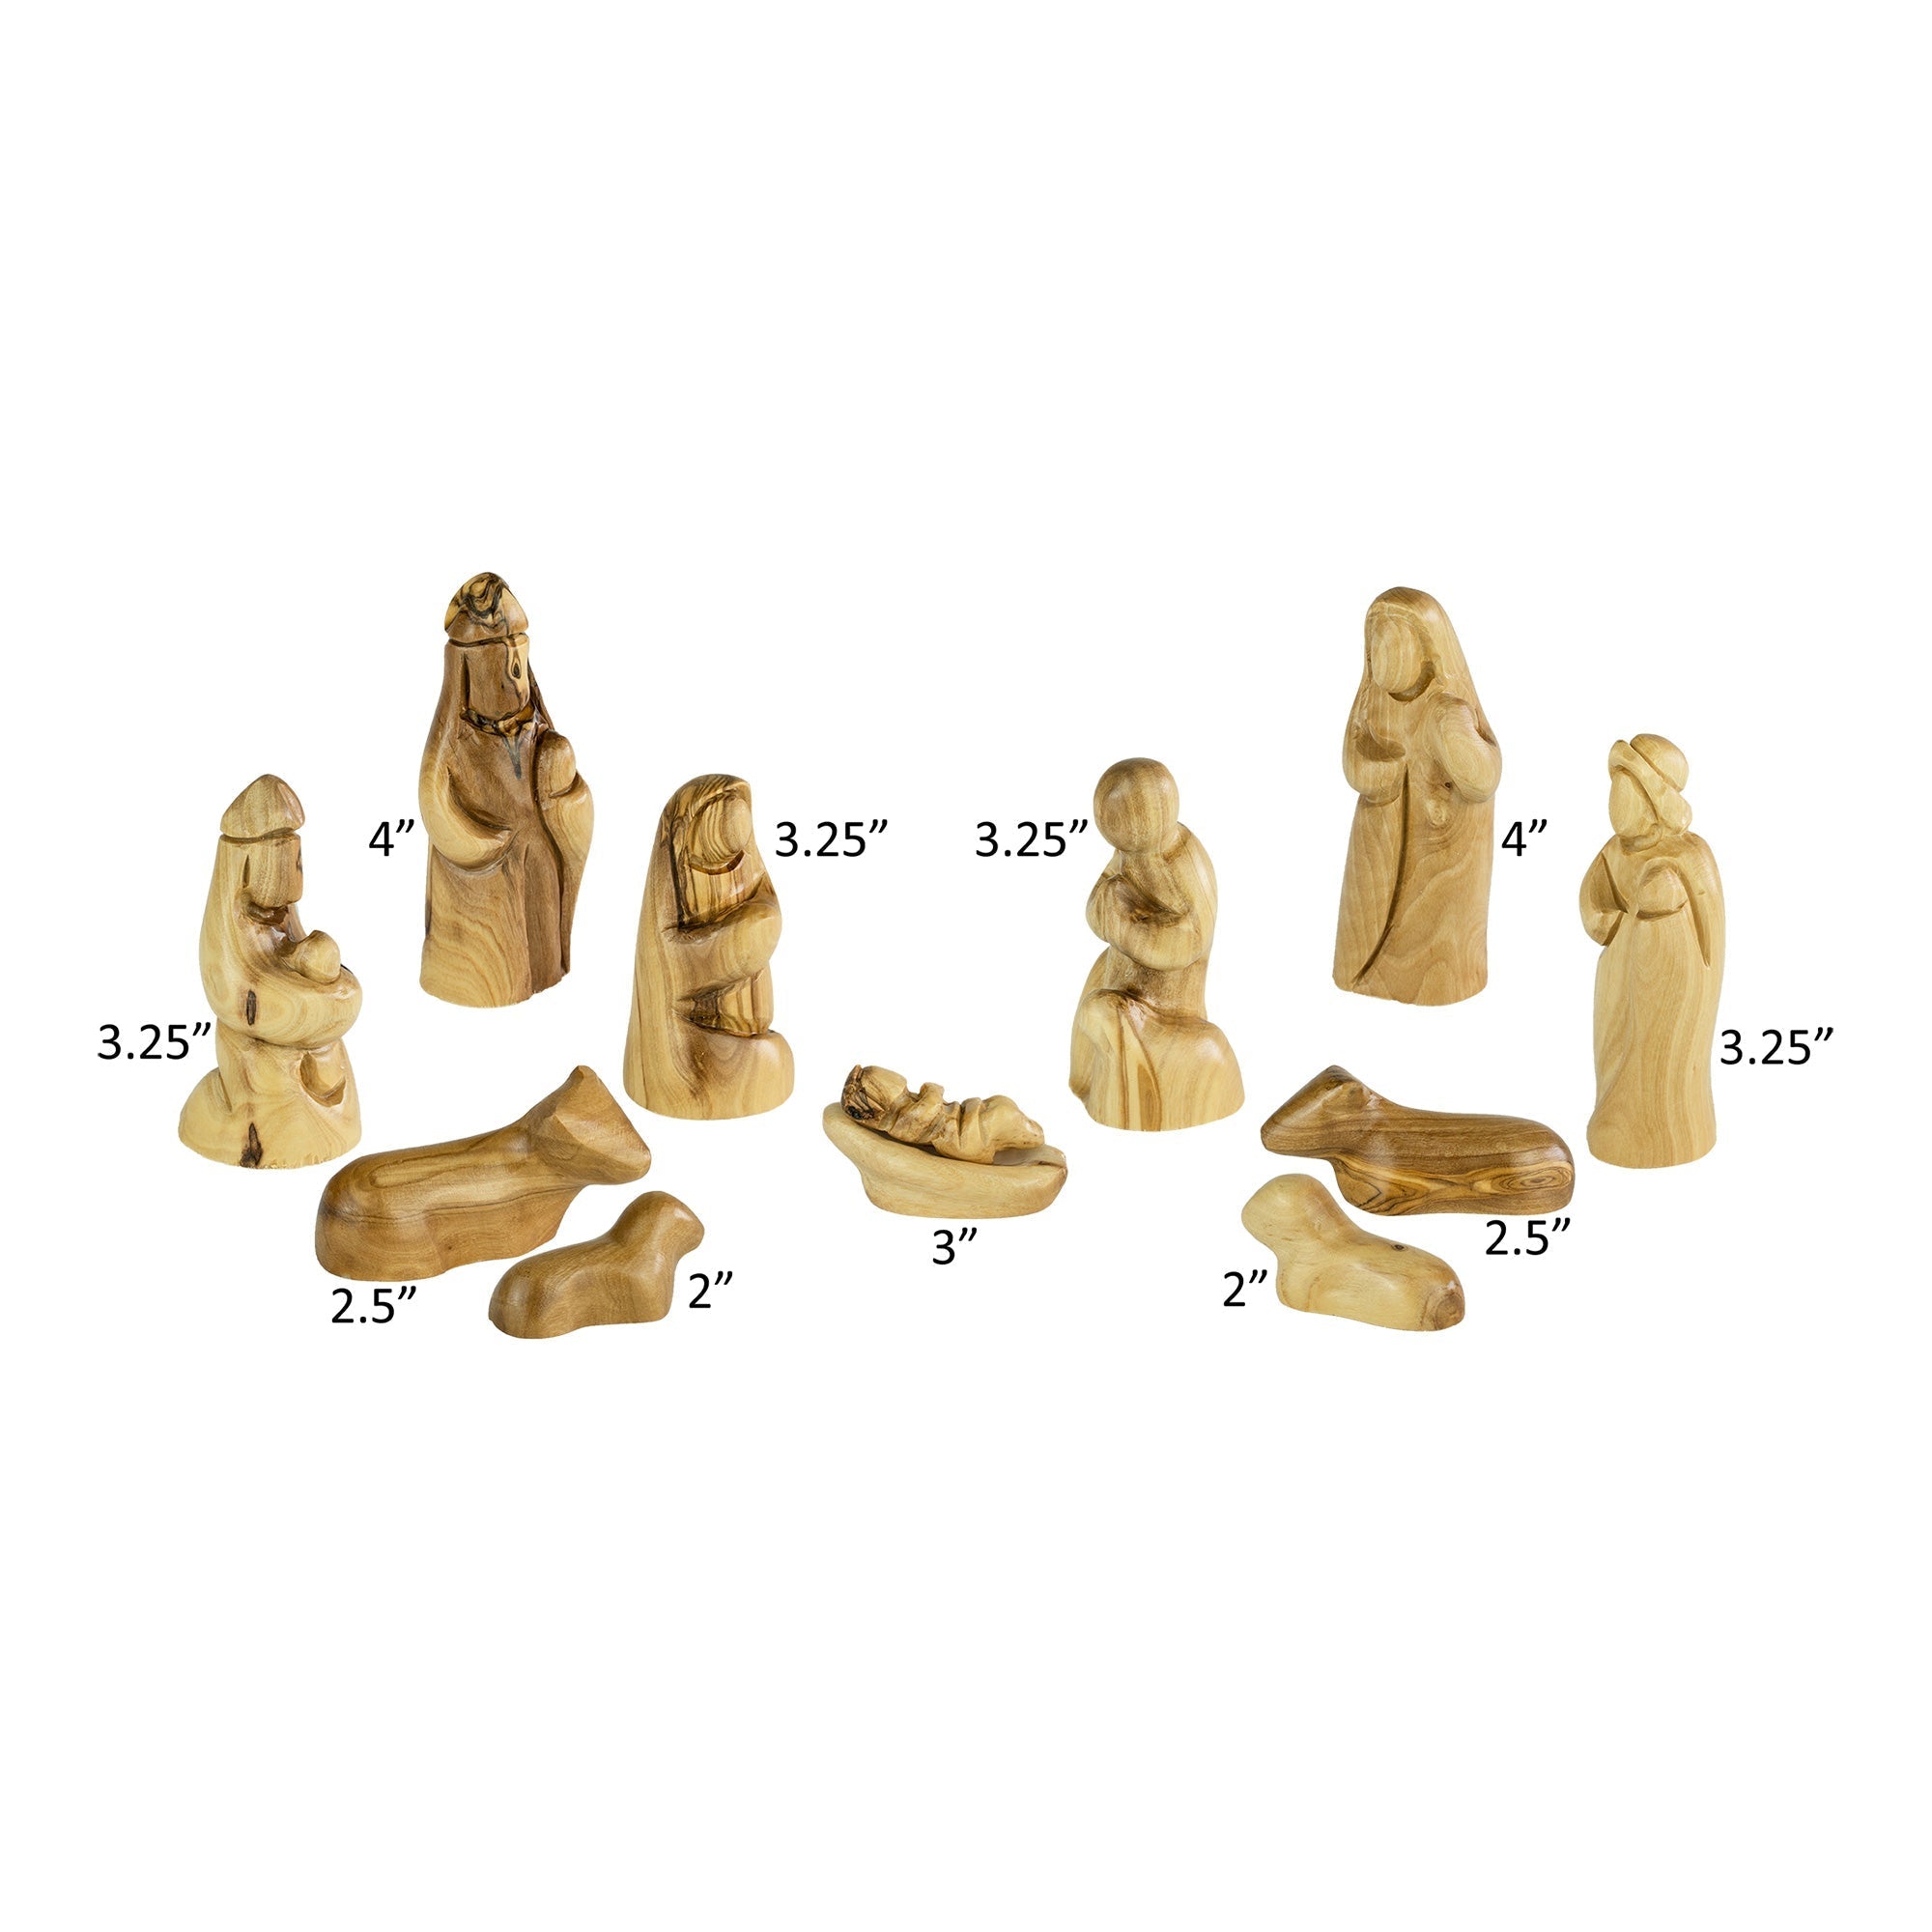 Holy Land Olive Wood Nativity with Log Stable with Bark and Small Faceless Figurines